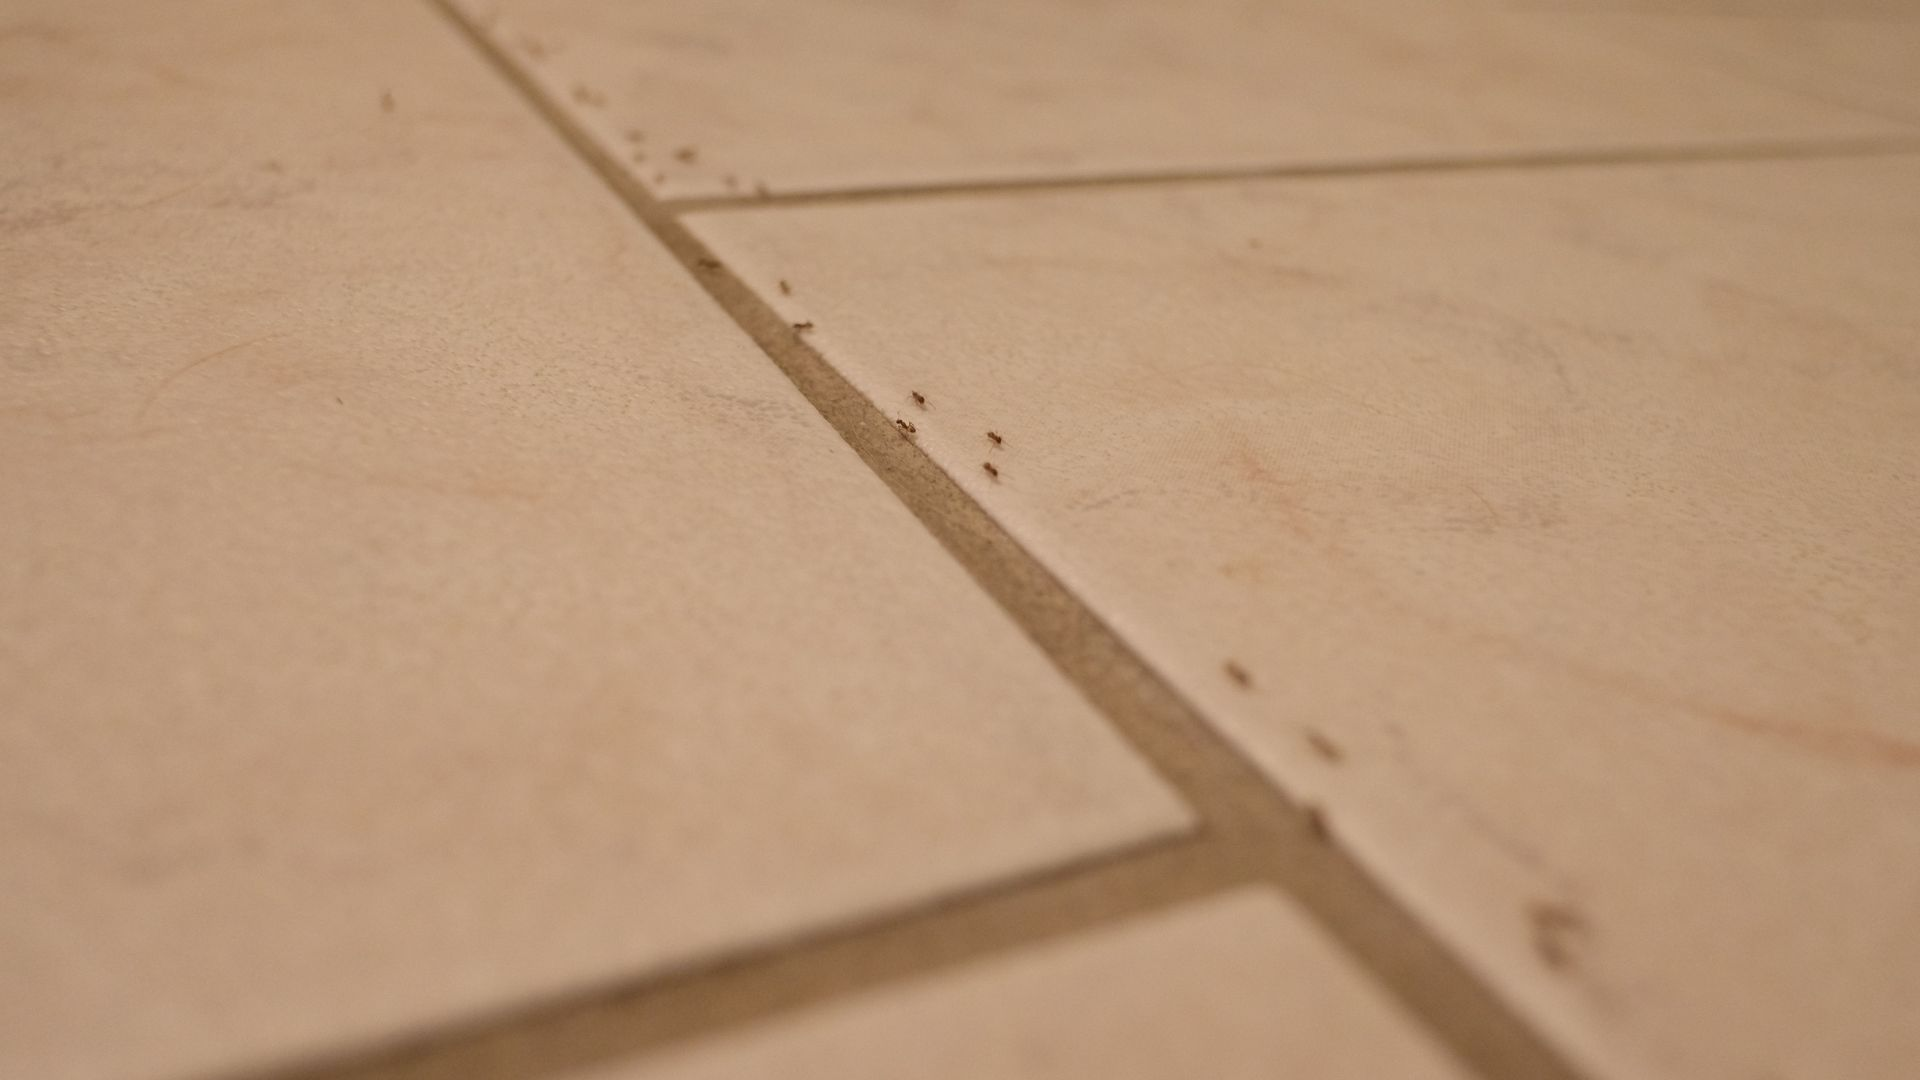 An image of ants walking along a path on a kitchen floor.